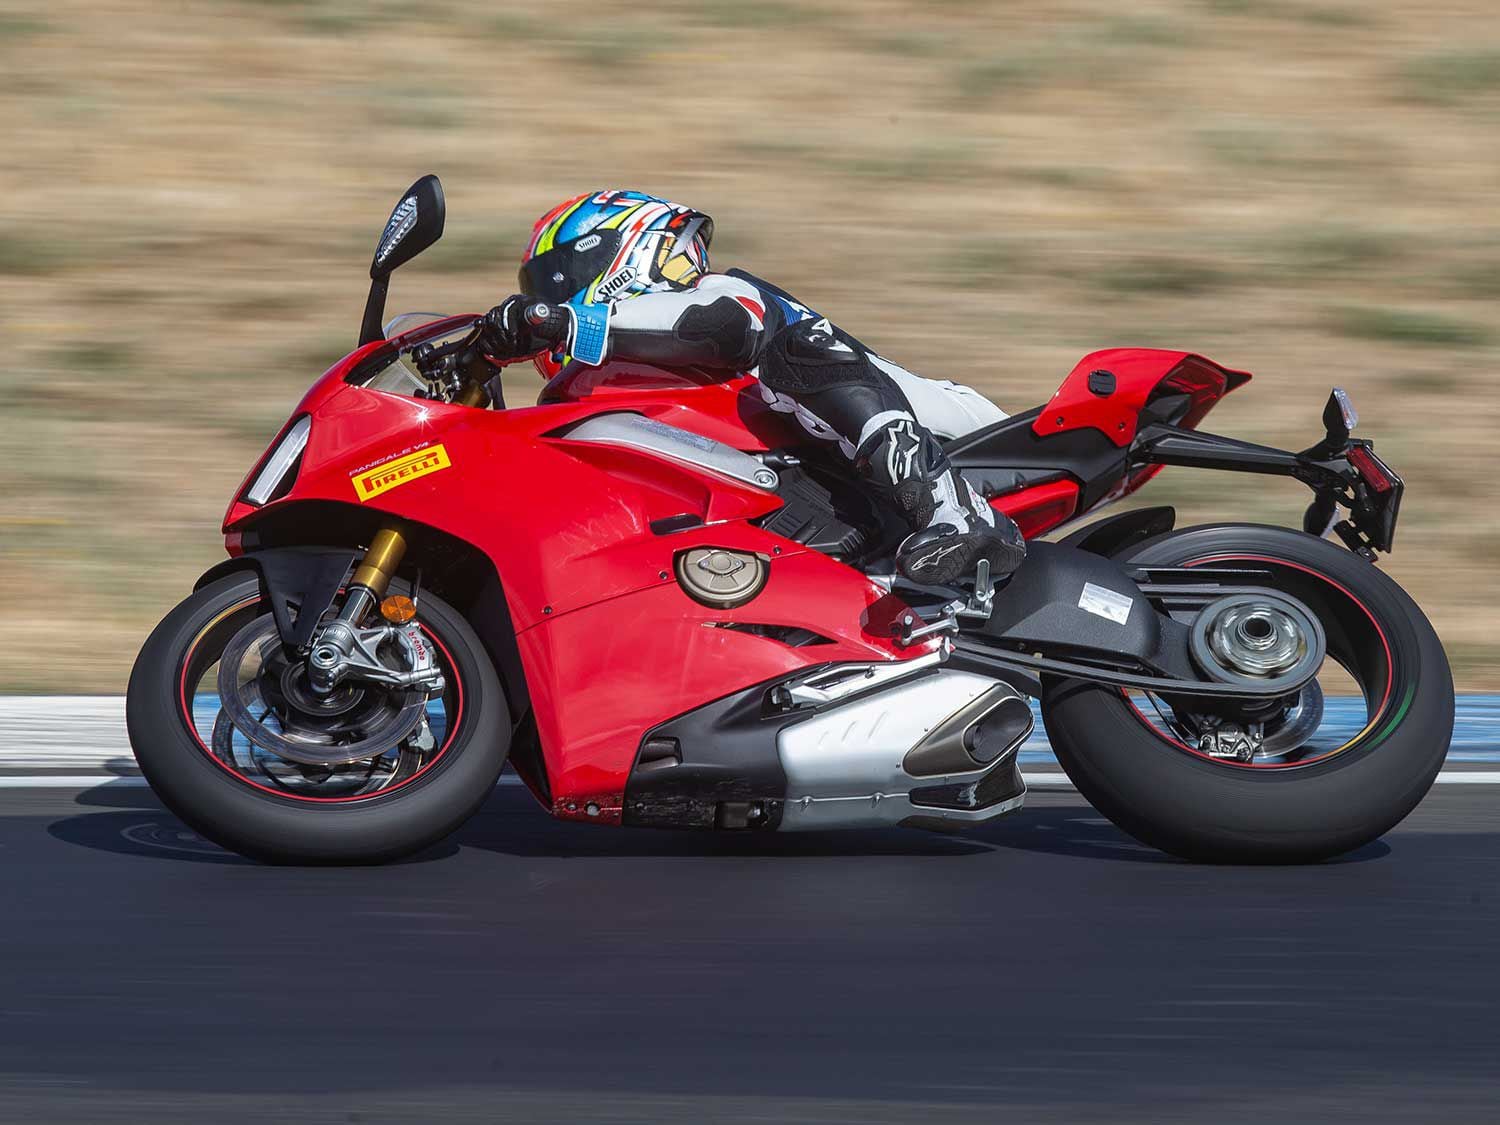 As usual, Ducati’s red-hot Panigale V4 makes our fastest production motorcycle list.